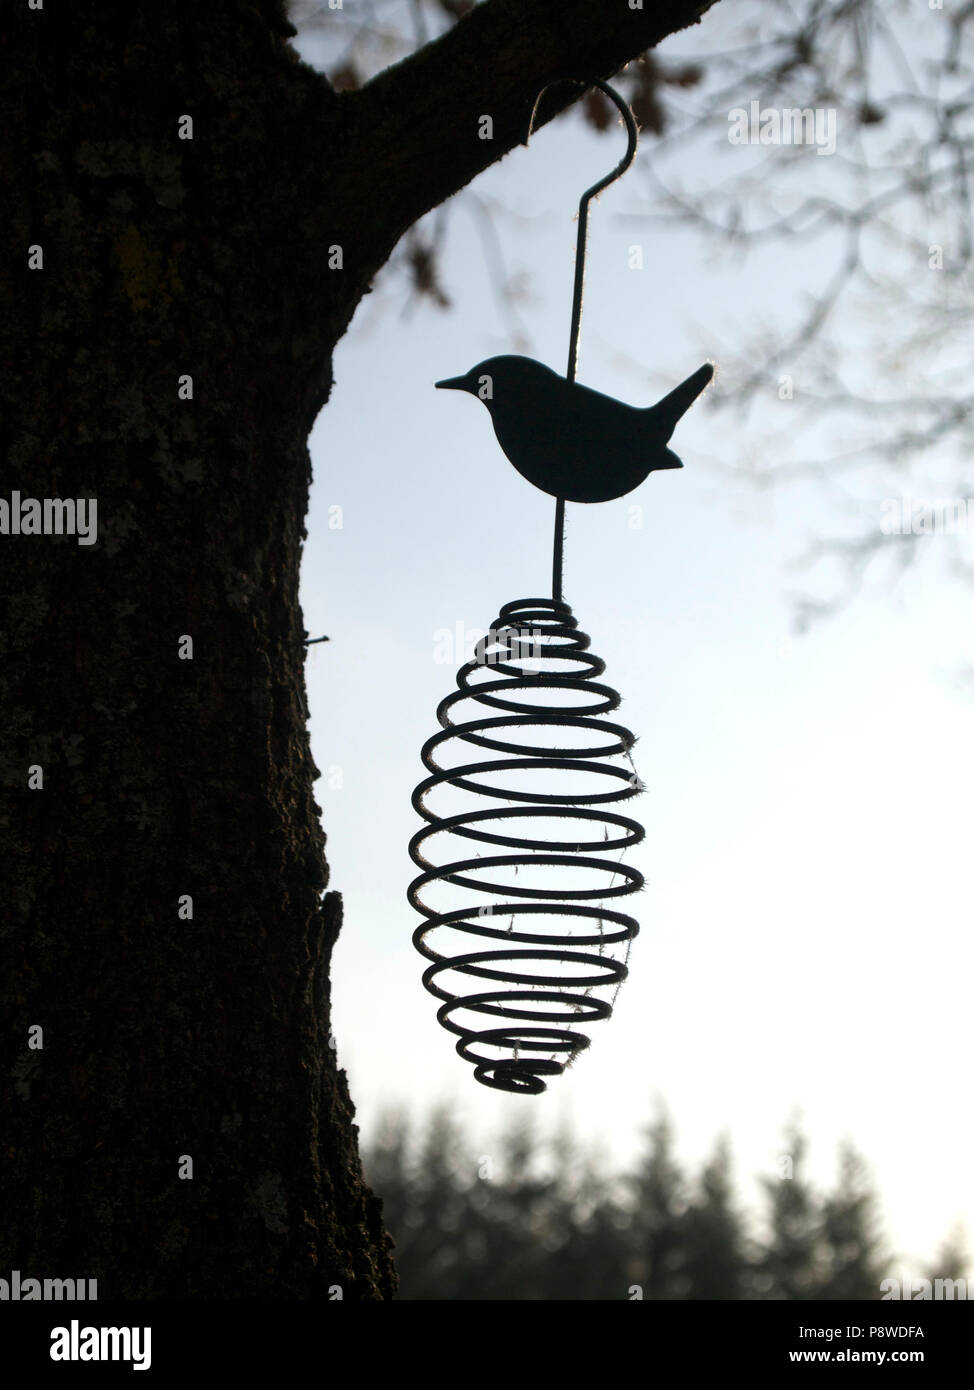 Metal bird ornament hanging from a tree Stock Photo